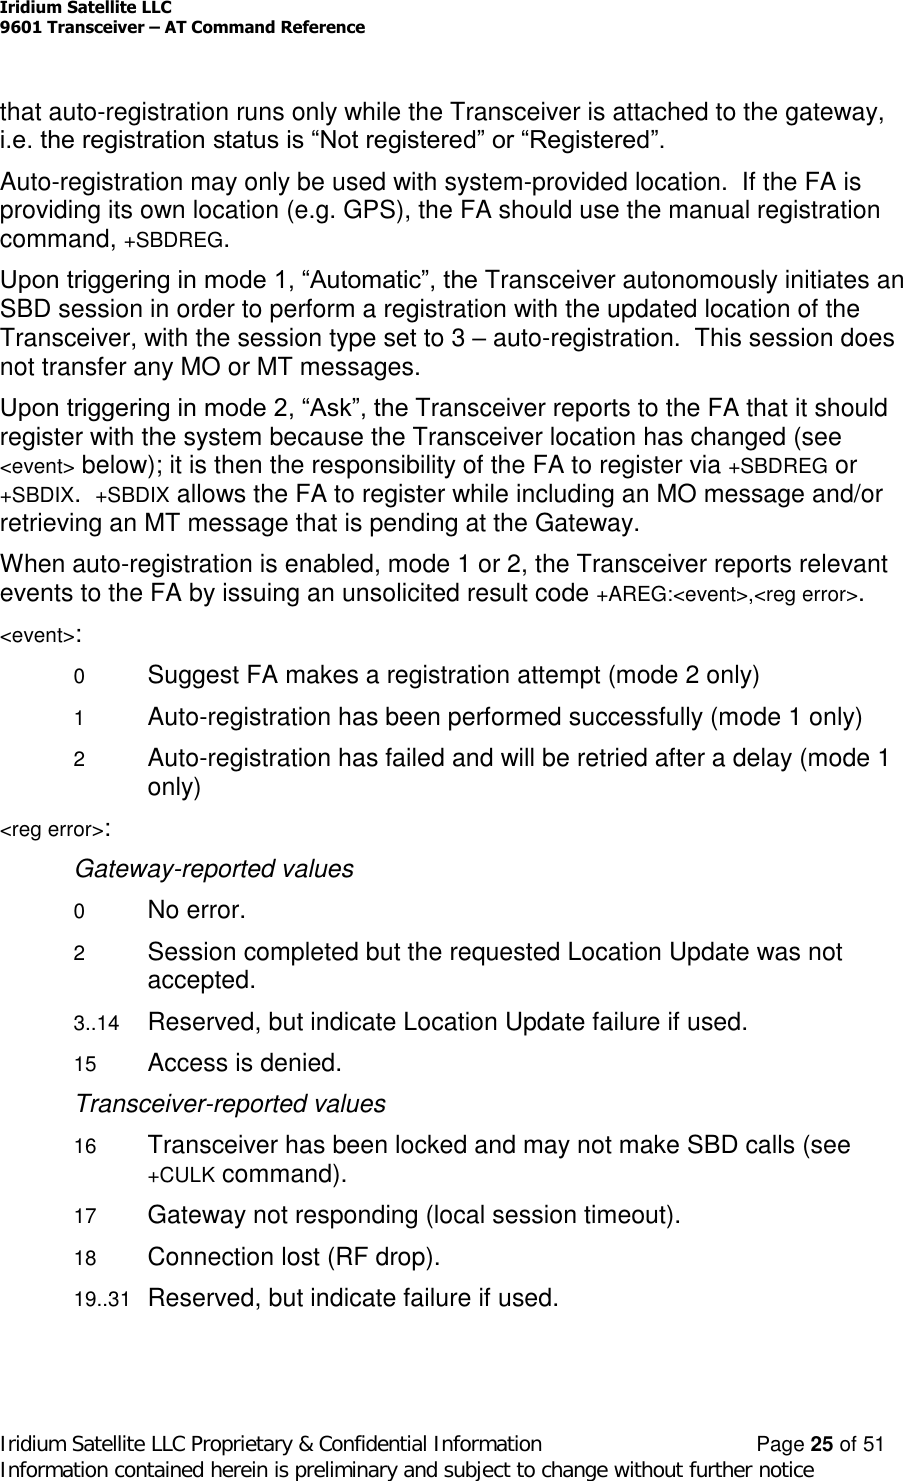 Iridium Satellite LLC9601 Transceiver –AT Command ReferenceIridium Satellite LLC Proprietary &amp; Confidential Information Page 25 of 51Information contained herein is preliminary and subject to change without further noticethat auto-registration runs only while the Transceiver is attached to the gateway,i.e. the registration status is “Not registered” or “Registered”.Auto-registration may only be used with system-provided location. If the FA isproviding its own location (e.g. GPS), the FA should use the manual registrationcommand, +SBDREG.Upon triggering in mode 1, “Automatic”, the Transceiver autonomously initiates anSBD session in order to perform a registration with the updated location of theTransceiver, with the session type set to 3 –auto-registration. This session doesnot transfer any MO or MT messages.Upon triggering in mode 2, “Ask”, the Transceiver reports to the FA that it shouldregister with the system because the Transceiver location has changed (see&lt;event&gt; below); it is then the responsibility of the FA to register via +SBDREG or+SBDIX.+SBDIX allows the FA to register while including an MO message and/orretrieving an MT message that is pending at the Gateway.When auto-registration is enabled, mode 1 or 2, the Transceiver reports relevantevents to the FA by issuing an unsolicited result code +AREG:&lt;event&gt;,&lt;reg error&gt;.&lt;event&gt;:0Suggest FA makes a registration attempt (mode 2 only)1Auto-registration has been performed successfully (mode 1 only)2Auto-registration has failed and will be retried after a delay (mode 1only)&lt;reg error&gt;:Gateway-reported values0No error.2Session completed but the requested Location Update was notaccepted.3..14 Reserved, but indicate Location Update failure if used.15 Access is denied.Transceiver-reported values16 Transceiver has been locked and may not make SBD calls (see+CULK command).17 Gateway not responding (local session timeout).18 Connection lost (RF drop).19..31 Reserved, but indicate failure if used.